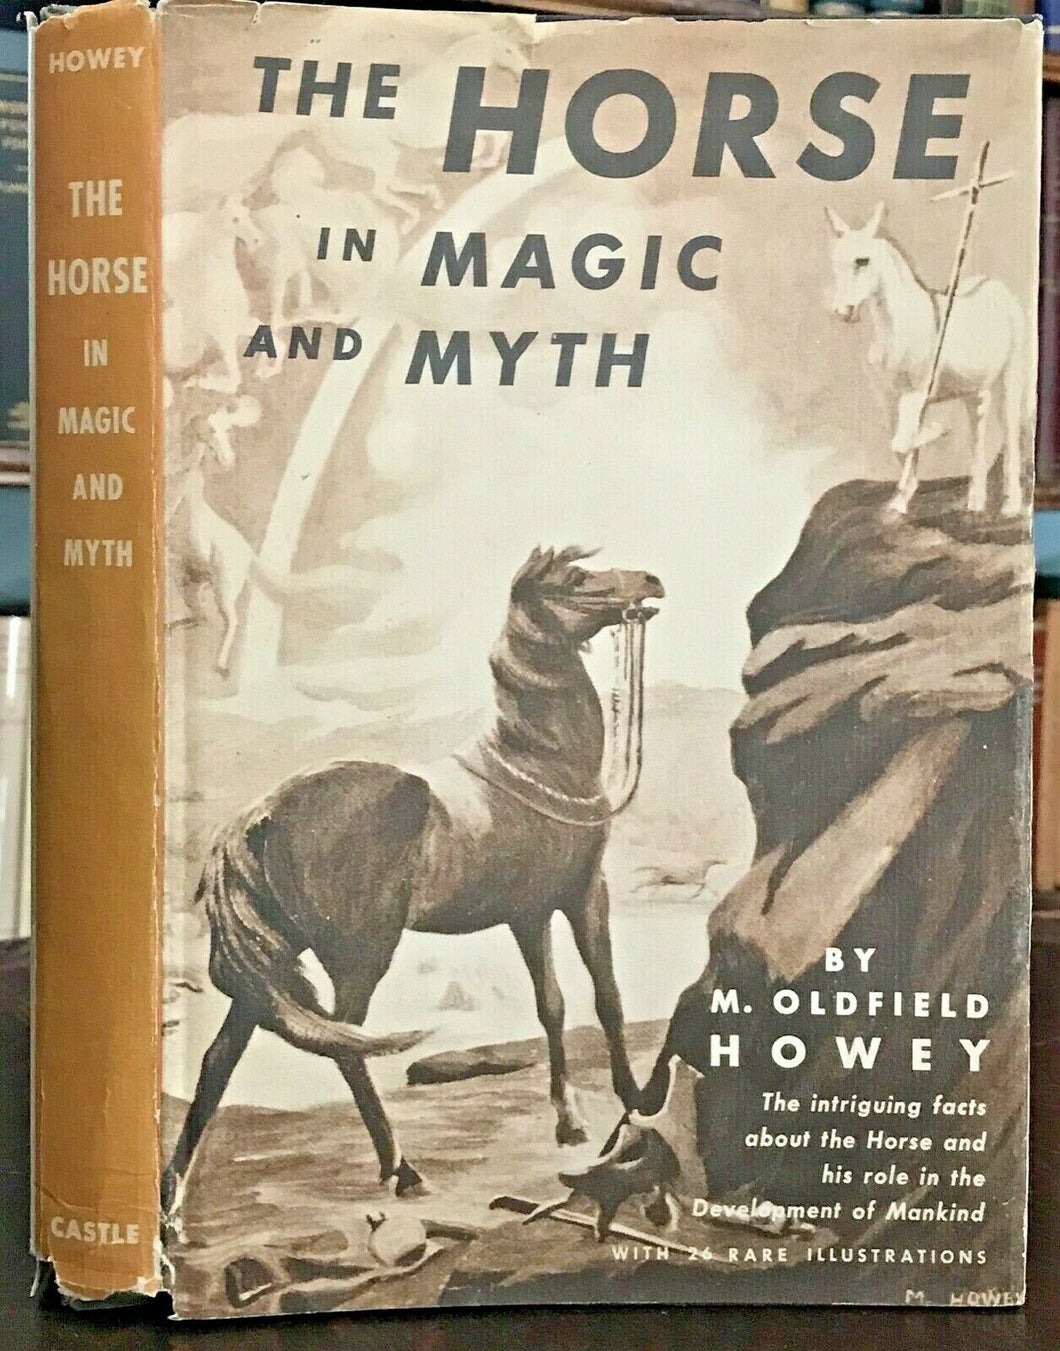 THE HORSE IN MAGIC AND MYTH - Howey, 1958 - EQUINE FOLKLORE MYTHS GHOST FAIRIES